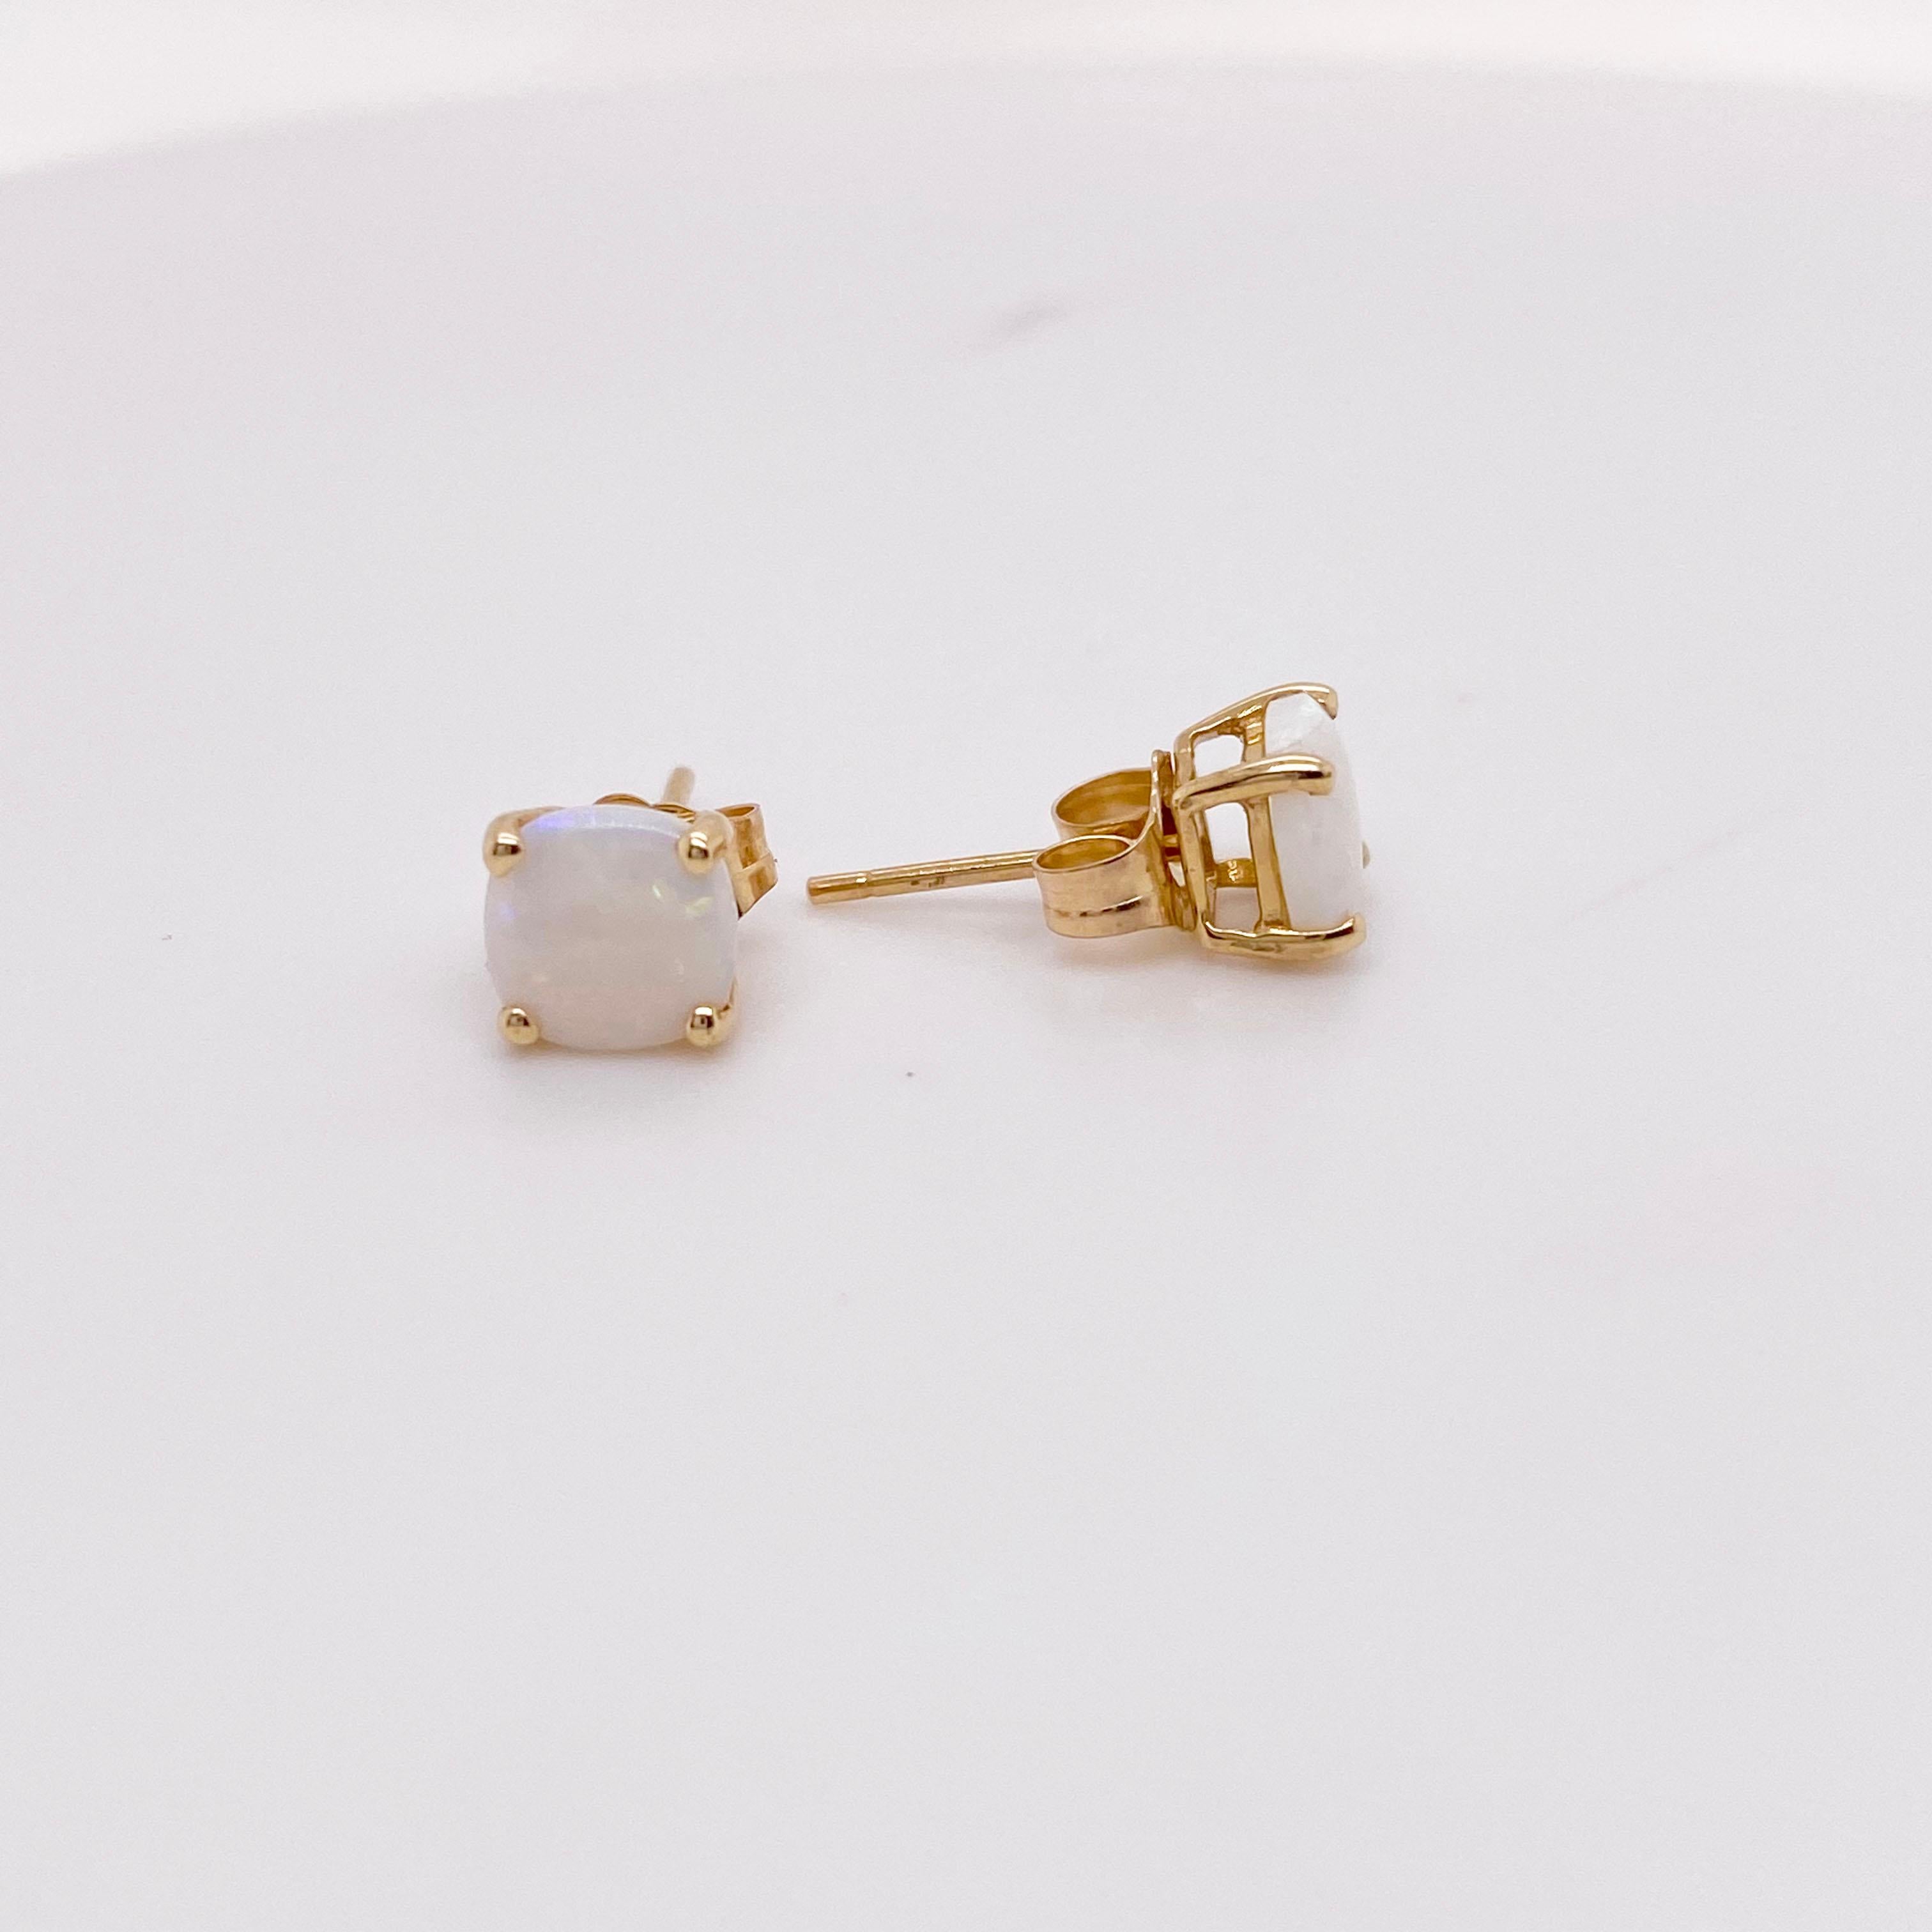 The details for these gorgeous earrings are listed below:
Metal Quality: 14kt Yellow Gold 
Earring Type: Stud 
Gemstone: Opal
Gemstone Weight: 0.57 ct 
Gemstone Color: Opal
Measurements: 6mm X 6mm 
Post Type: Stud
Total Carat Weight: 0.57 ct 